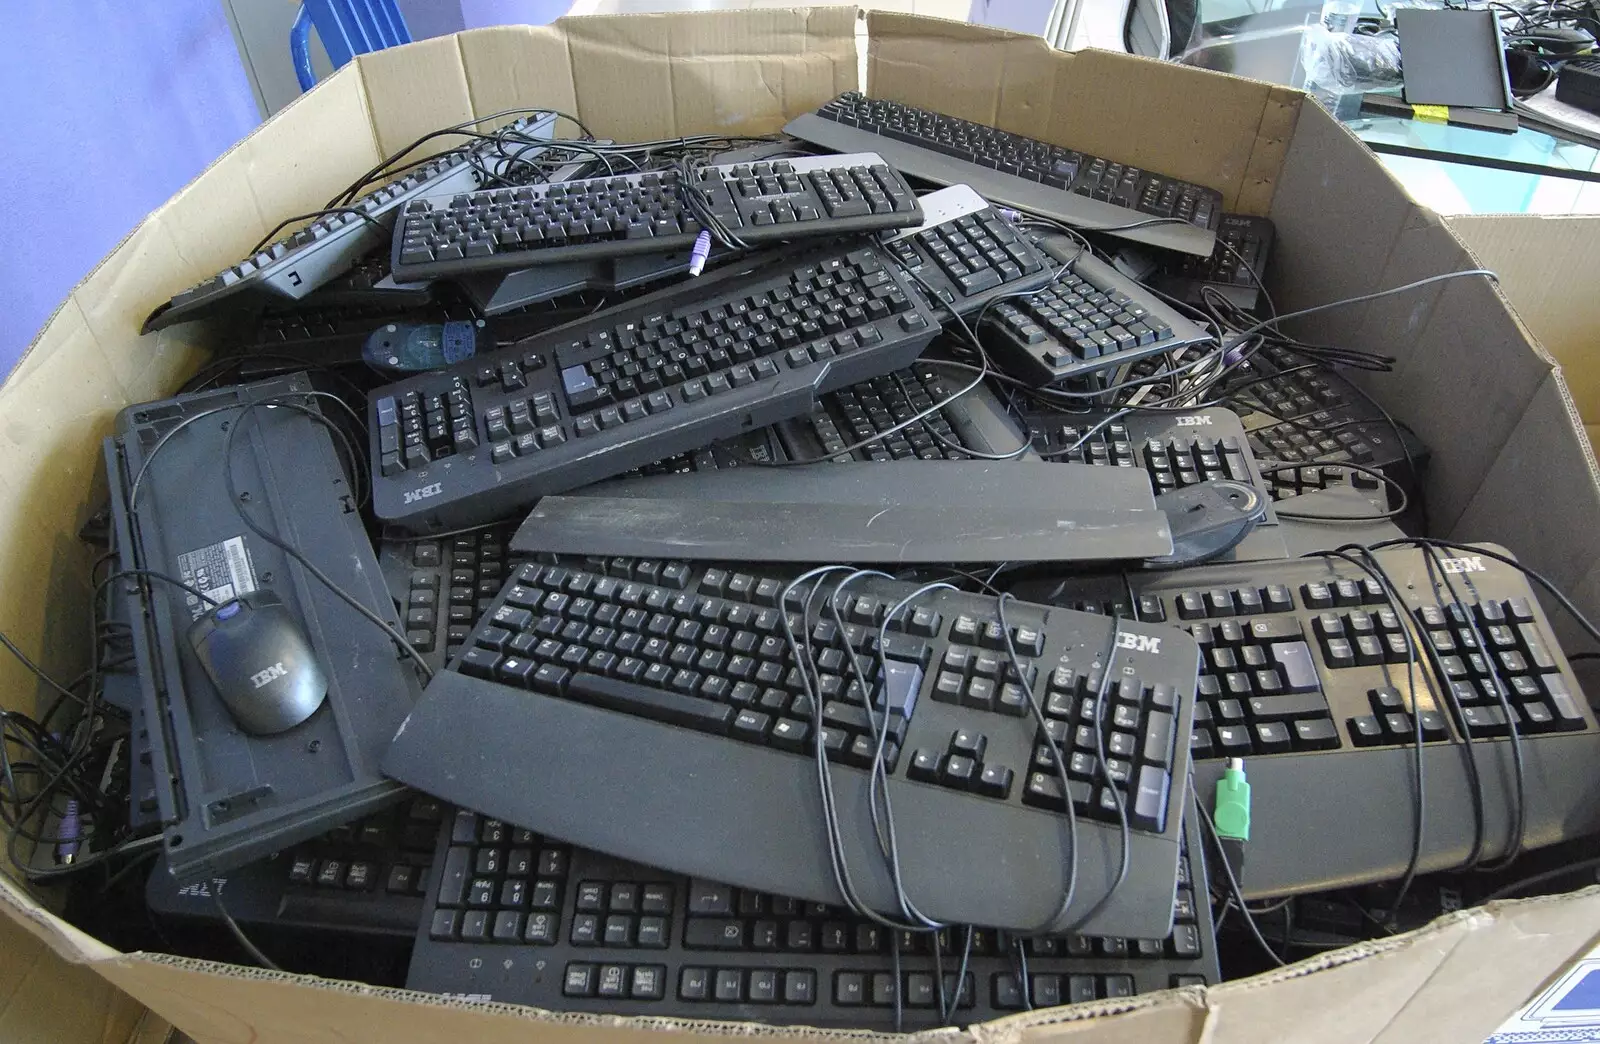 A thousand keyboards in a box, from Mother and Mike, Rachel and Sam, and the Scan That Changes Everything - 30th March 2008